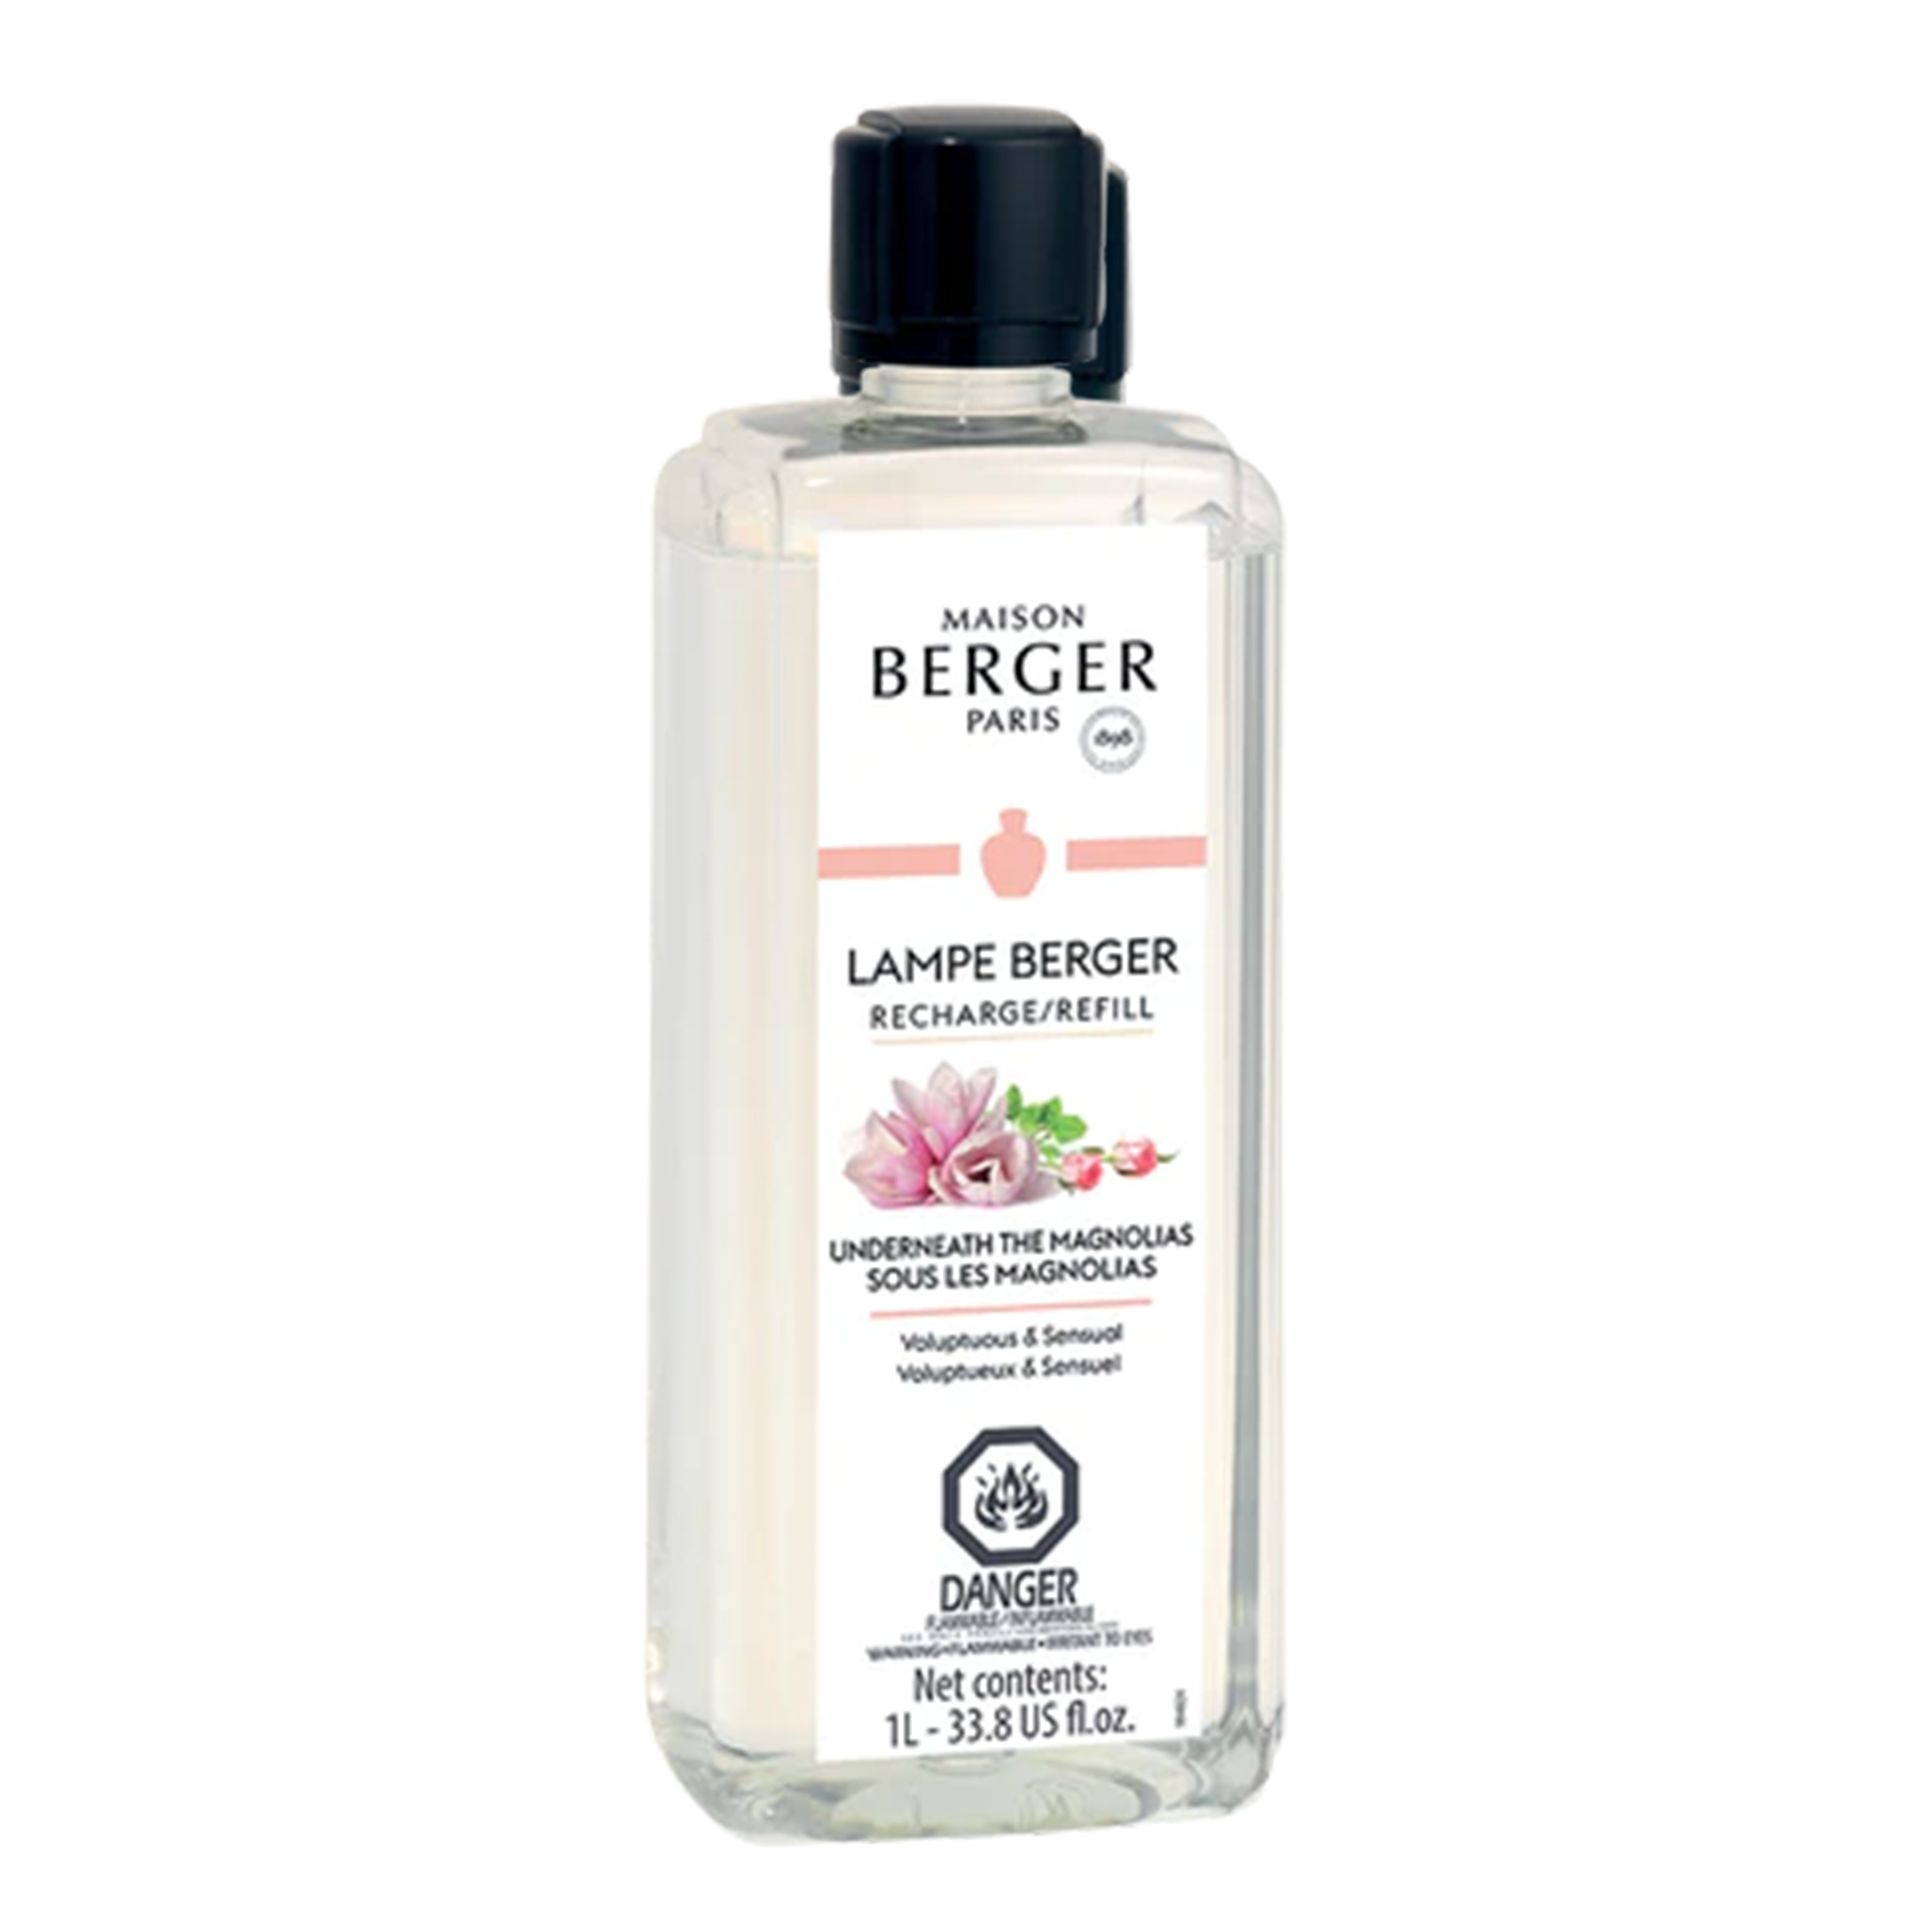 A 500ml bottle of Lampe Berger Underneath the Magnolias fragrance oil, featuring a label with the product name and branding. The bottle is a translucent frosted color with a narrow neck and a black cap. 